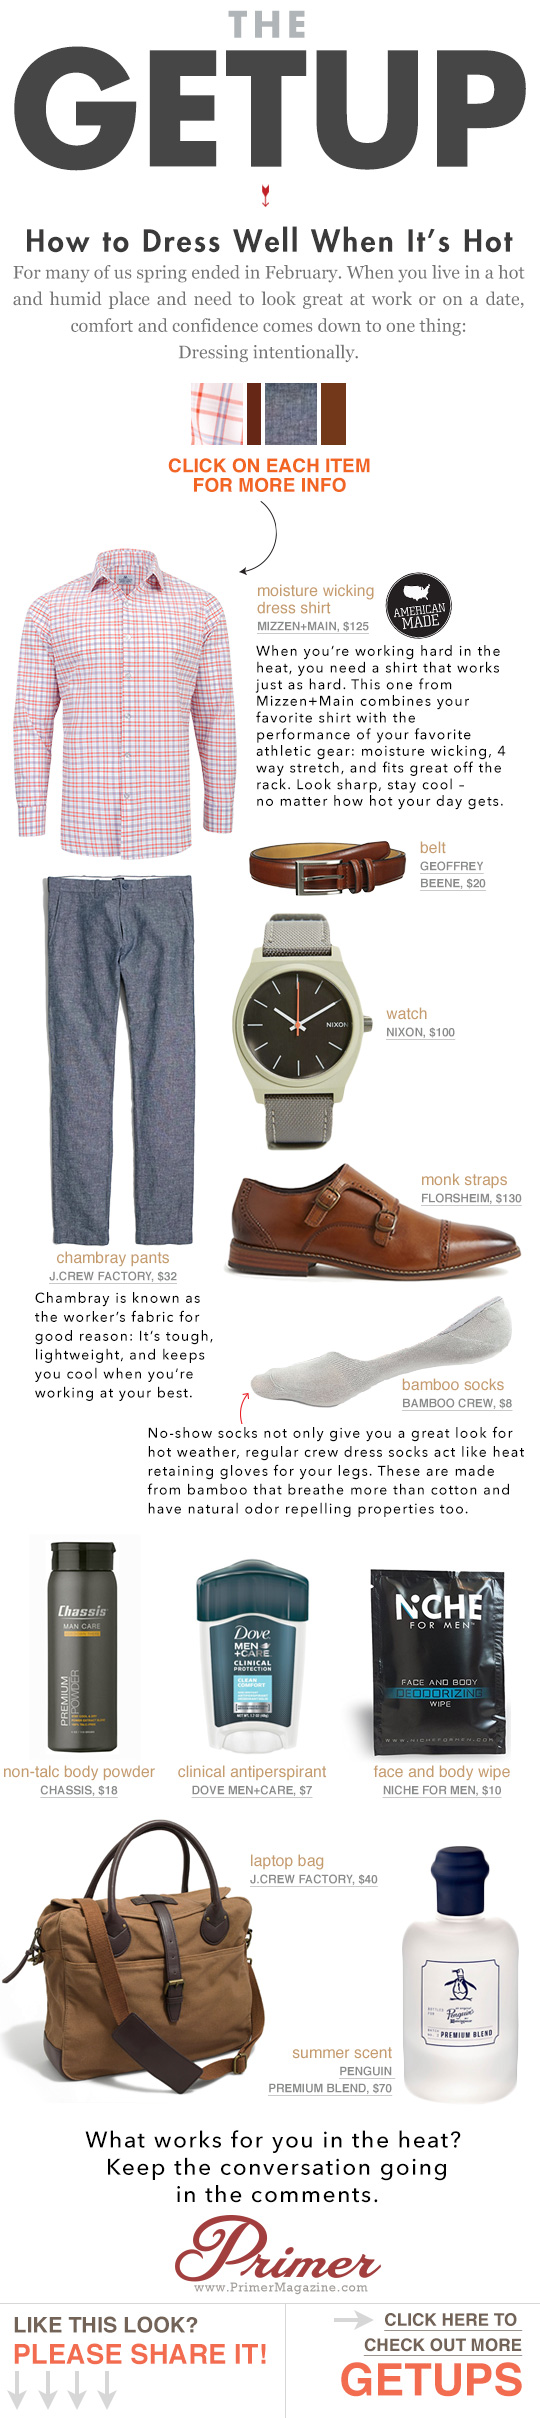 The Getup How to Dress Well When It\'s hot - outfit inspiration featuring tech fabrics and brown shoes